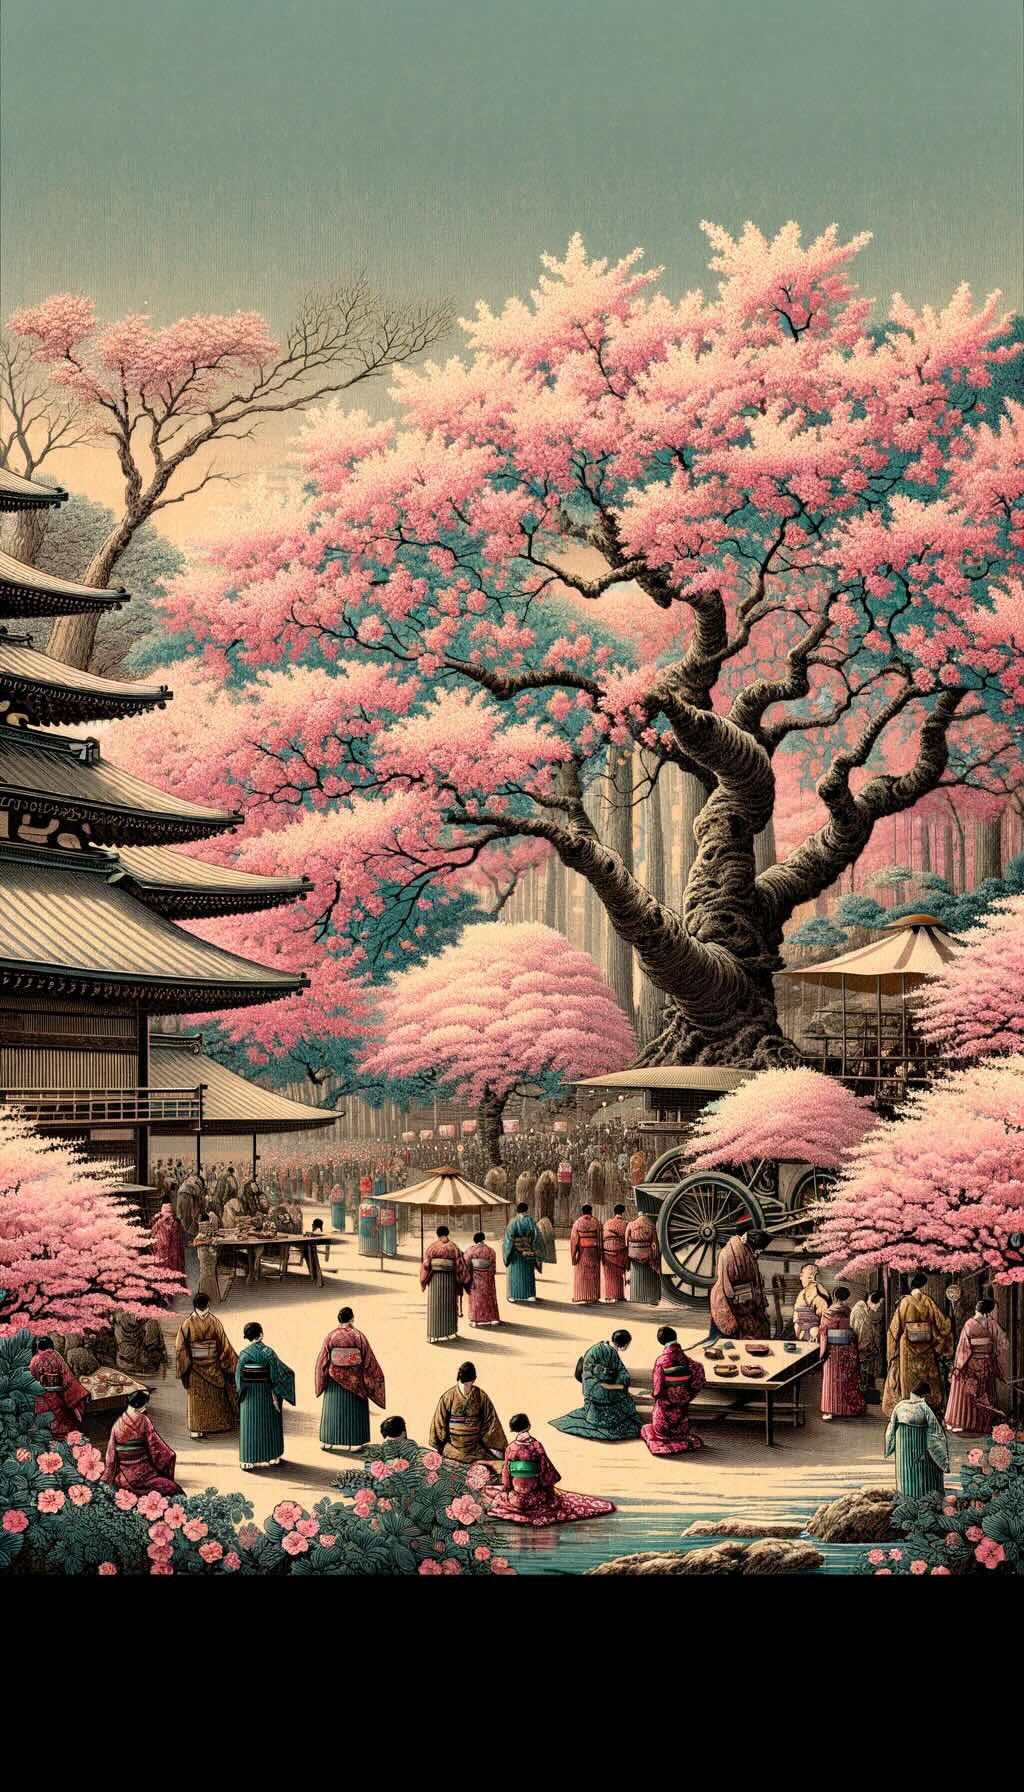 Essence of early and late blossoming cherry trees in Japan, along with the historical and cultural significance of sakura portrays the tranquil scenes of less crowded cherry blossom viewing, traditional hanami celebrations, and the modern appreciation of sakura.